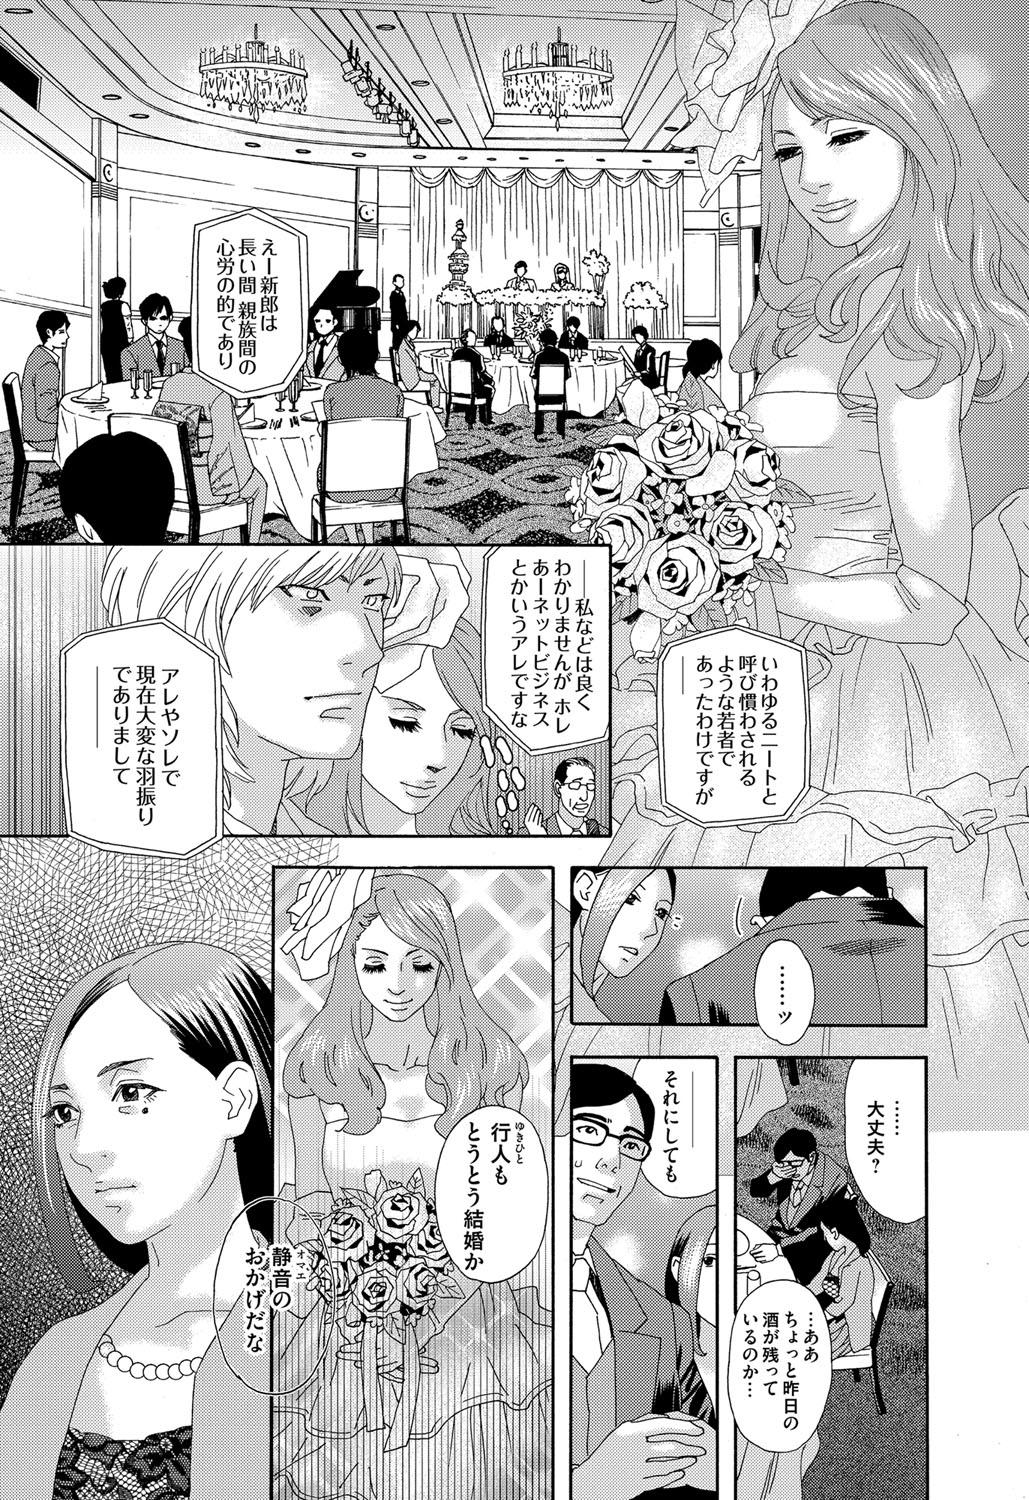 Tittyfuck 肉の塔 Ch. 01-07 Matures - Page 1